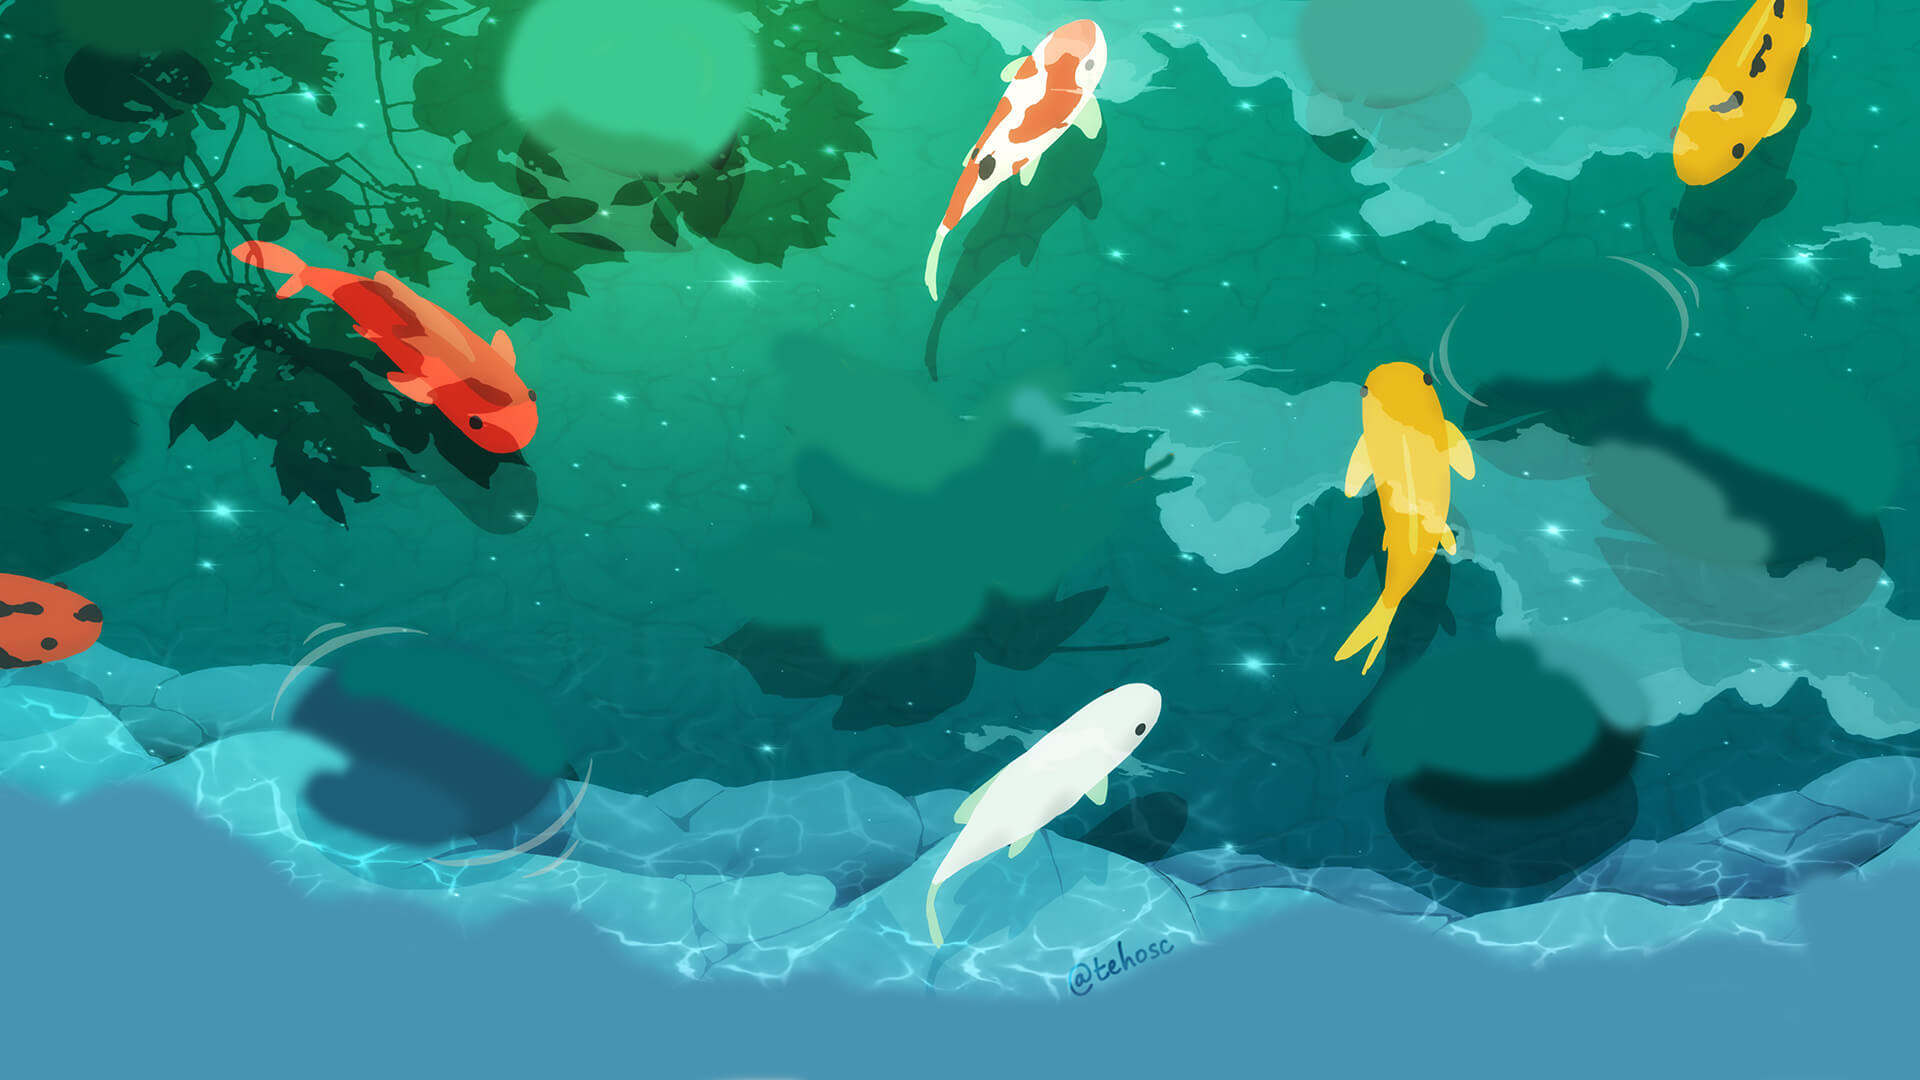 1920x1080 First creation with the Engine, tell me what you think! Koi pond under moonlight. (Credit for Art in comment.) : r/wallpaperengine